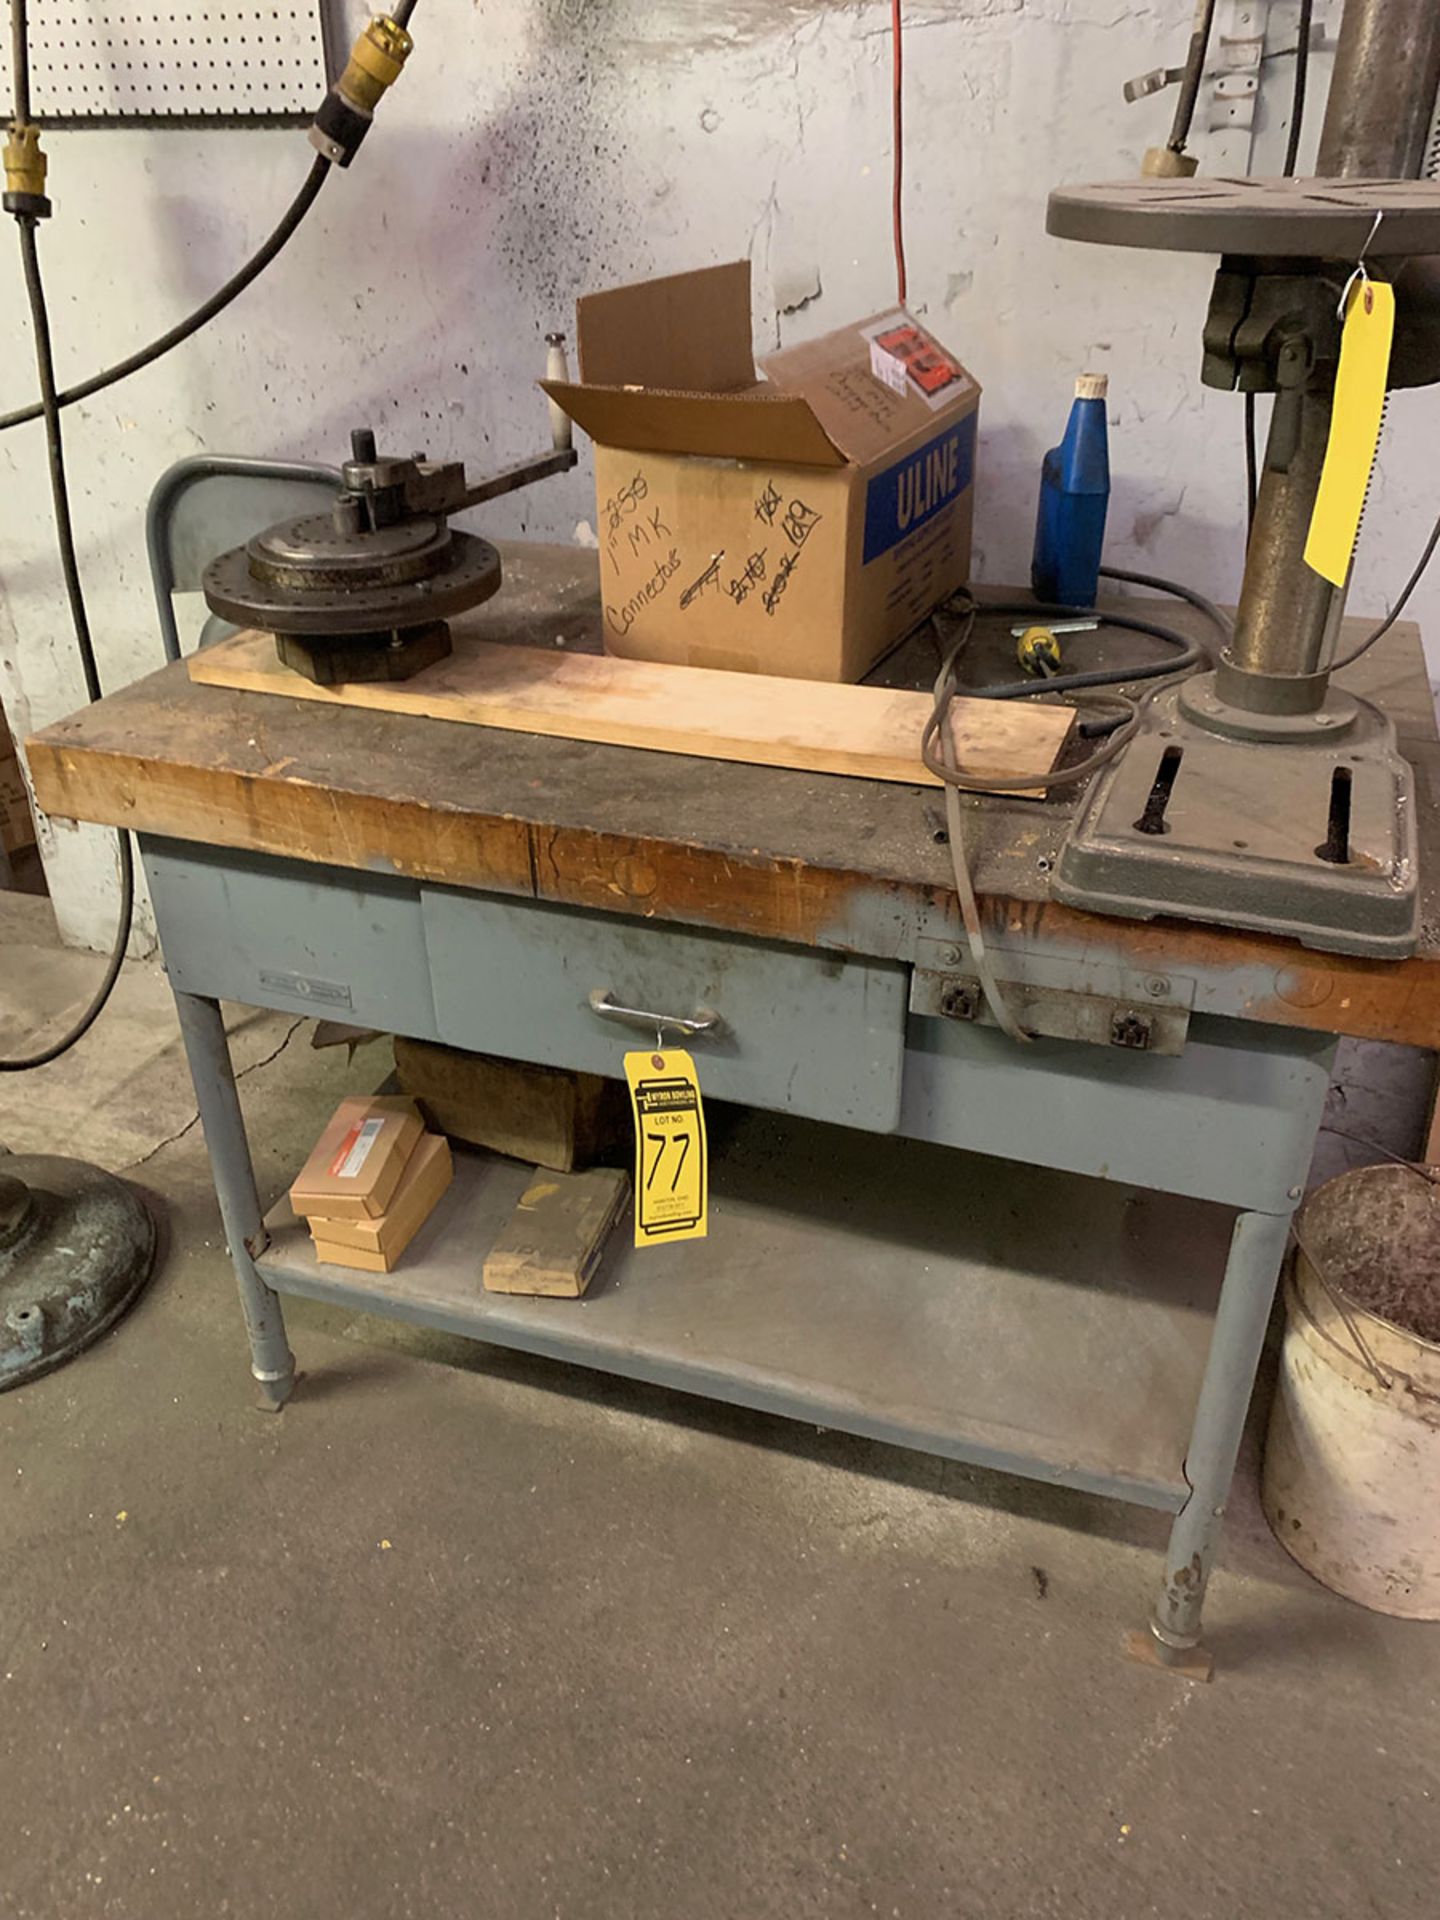 WORKBENCH WITH DAHLRO TUBE BENDER